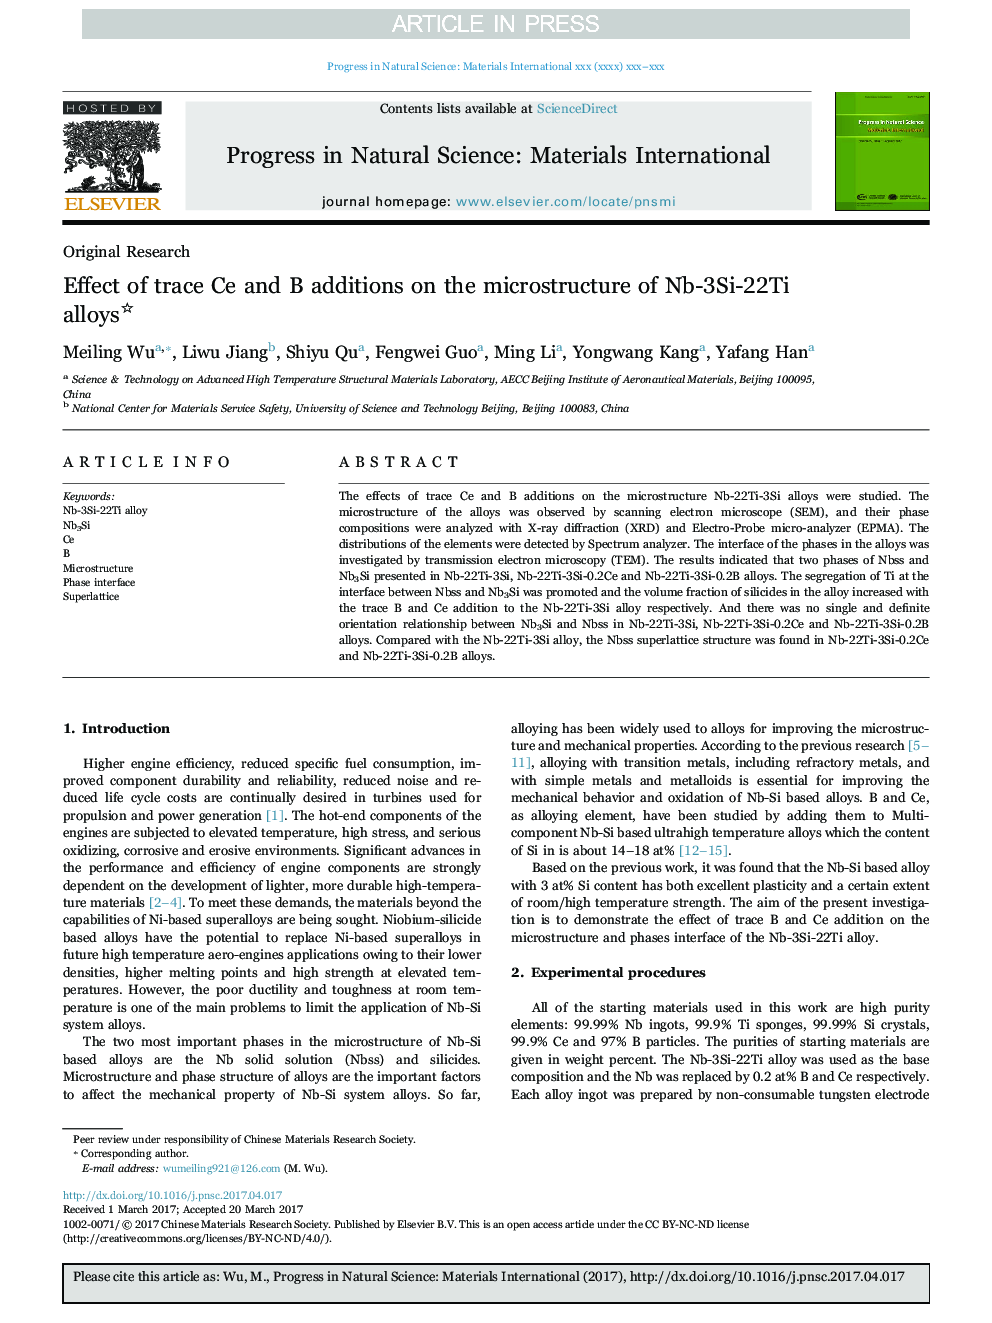 Effect of trace Ce and B additions on the microstructure of Nb-3Si-22Ti alloys